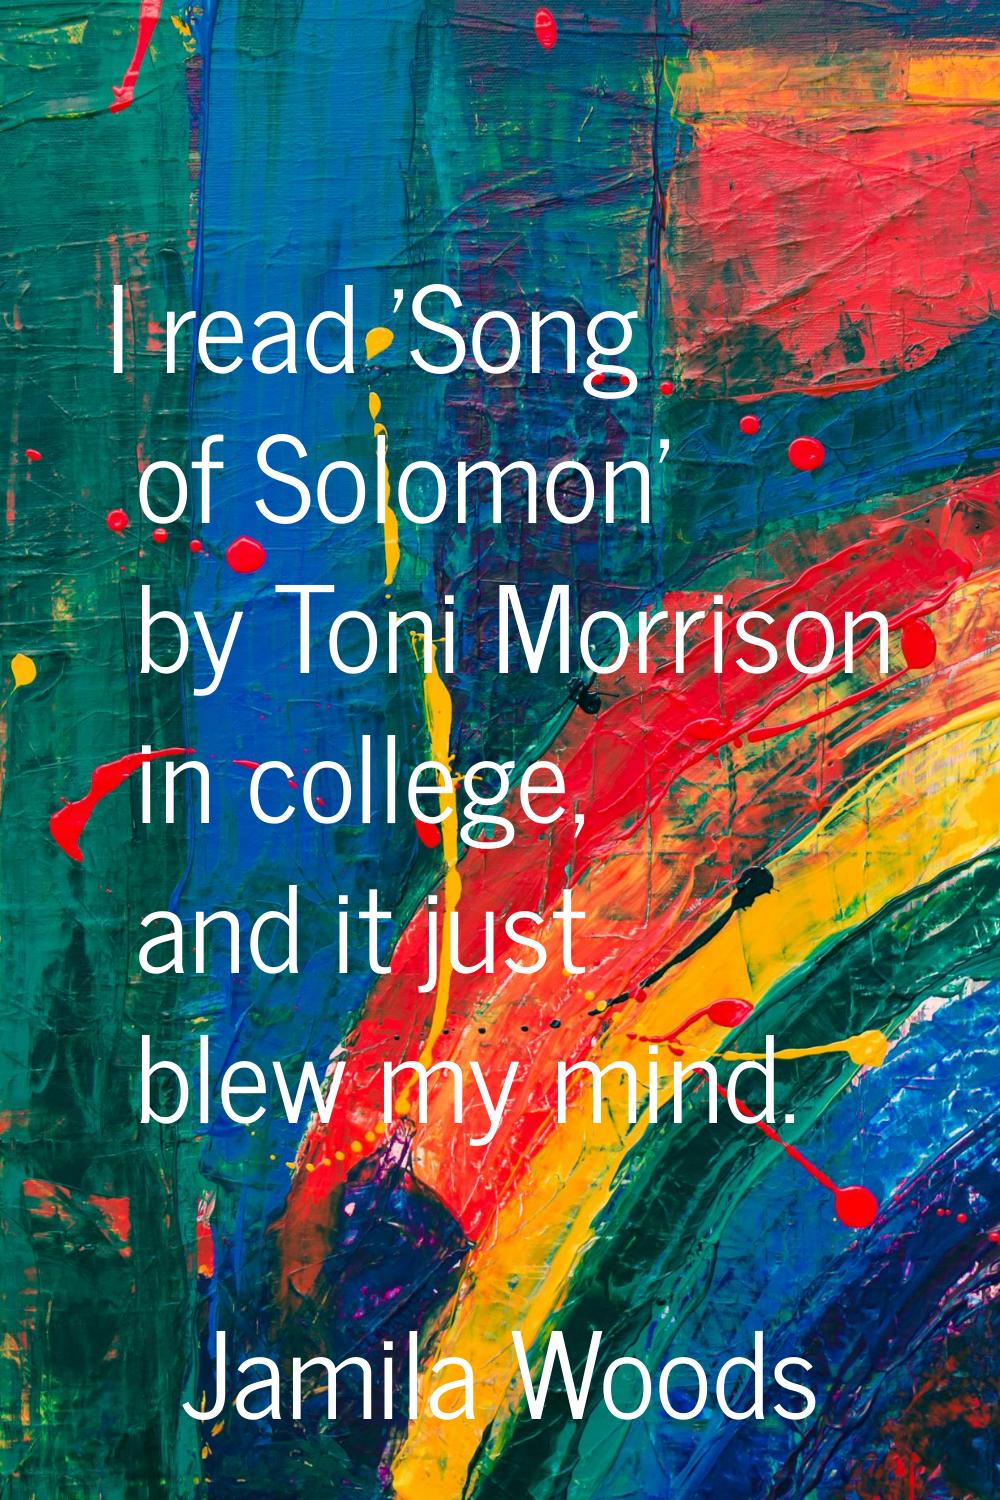 I read 'Song of Solomon' by Toni Morrison in college, and it just blew my mind.